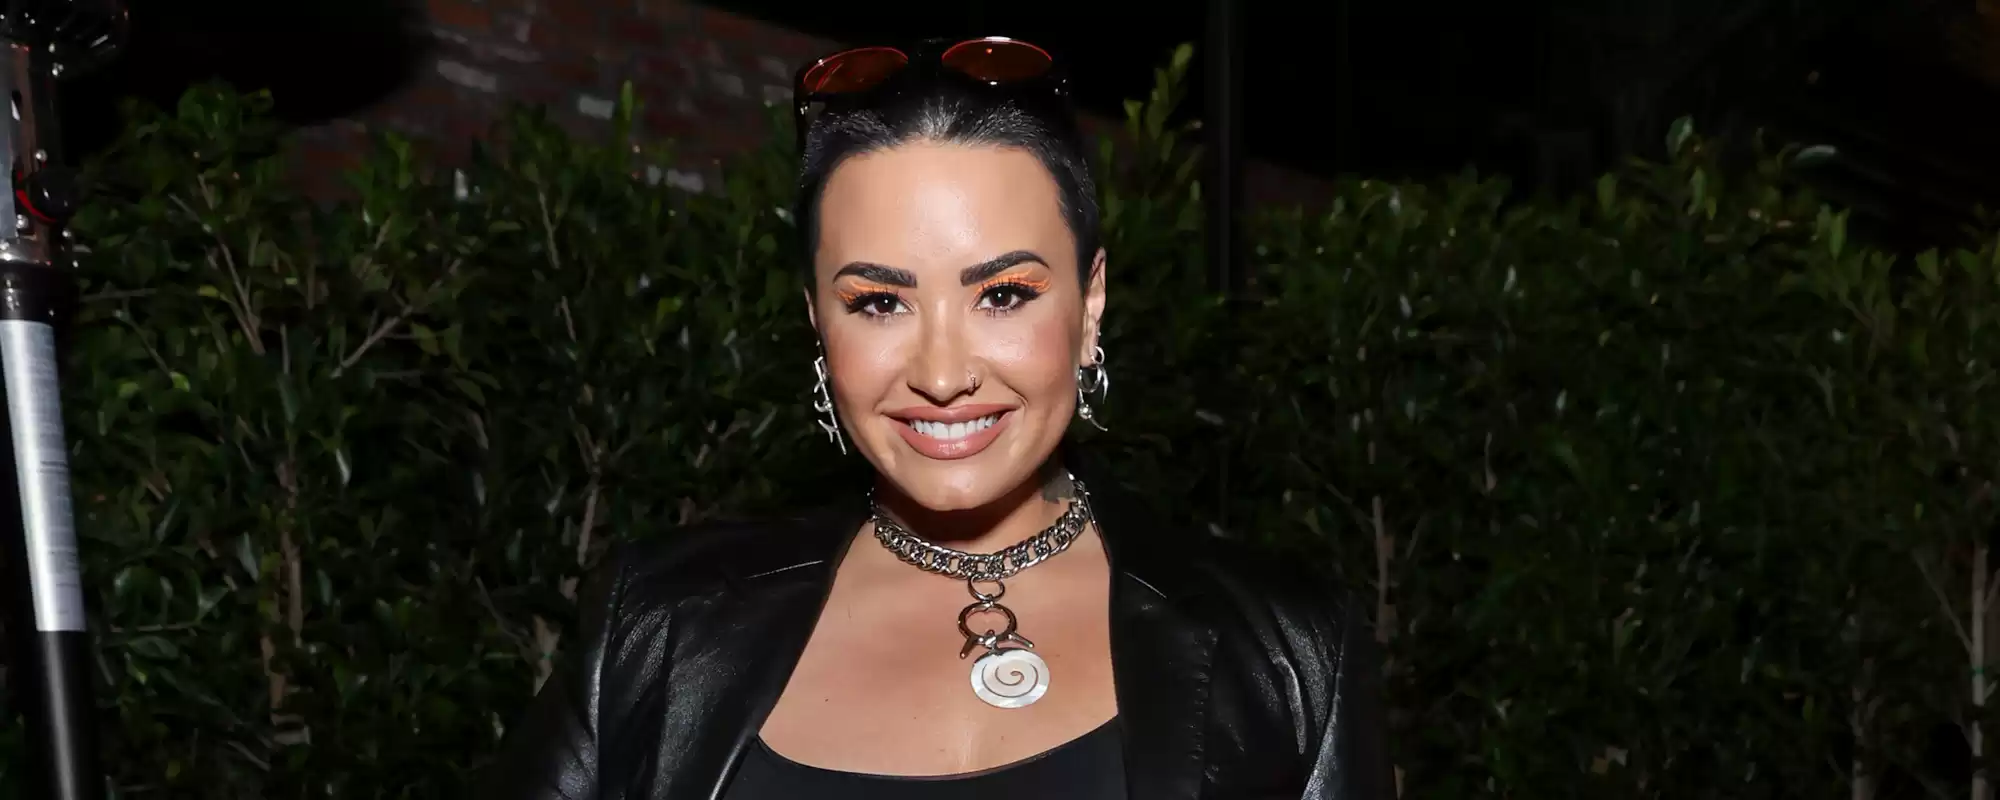 Demi Lovato Electrifies Fourth of July Fireworks with an Energetic Performance of "Cool for the Summer"